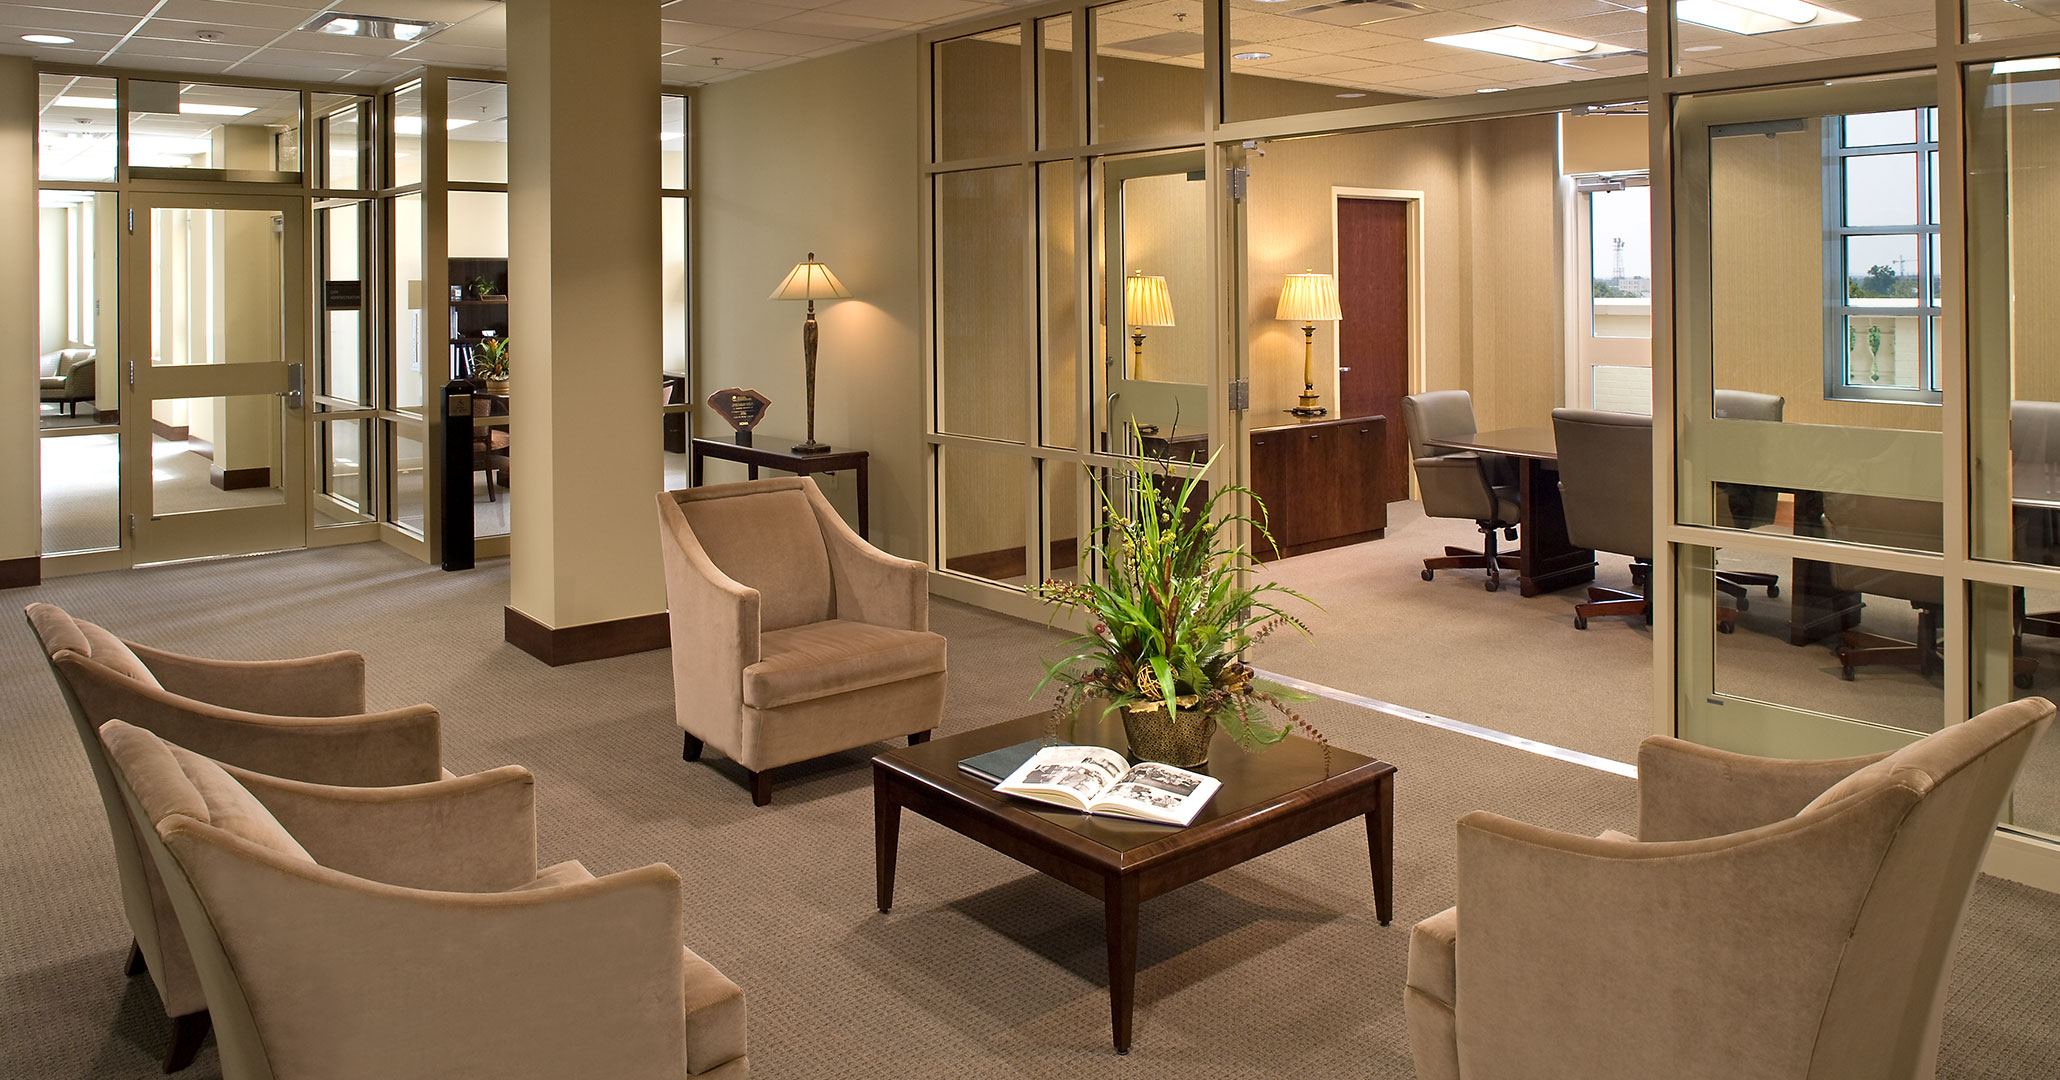 Boudreaux designed traditional government spaces highlighting spaces for North Augusta workers.